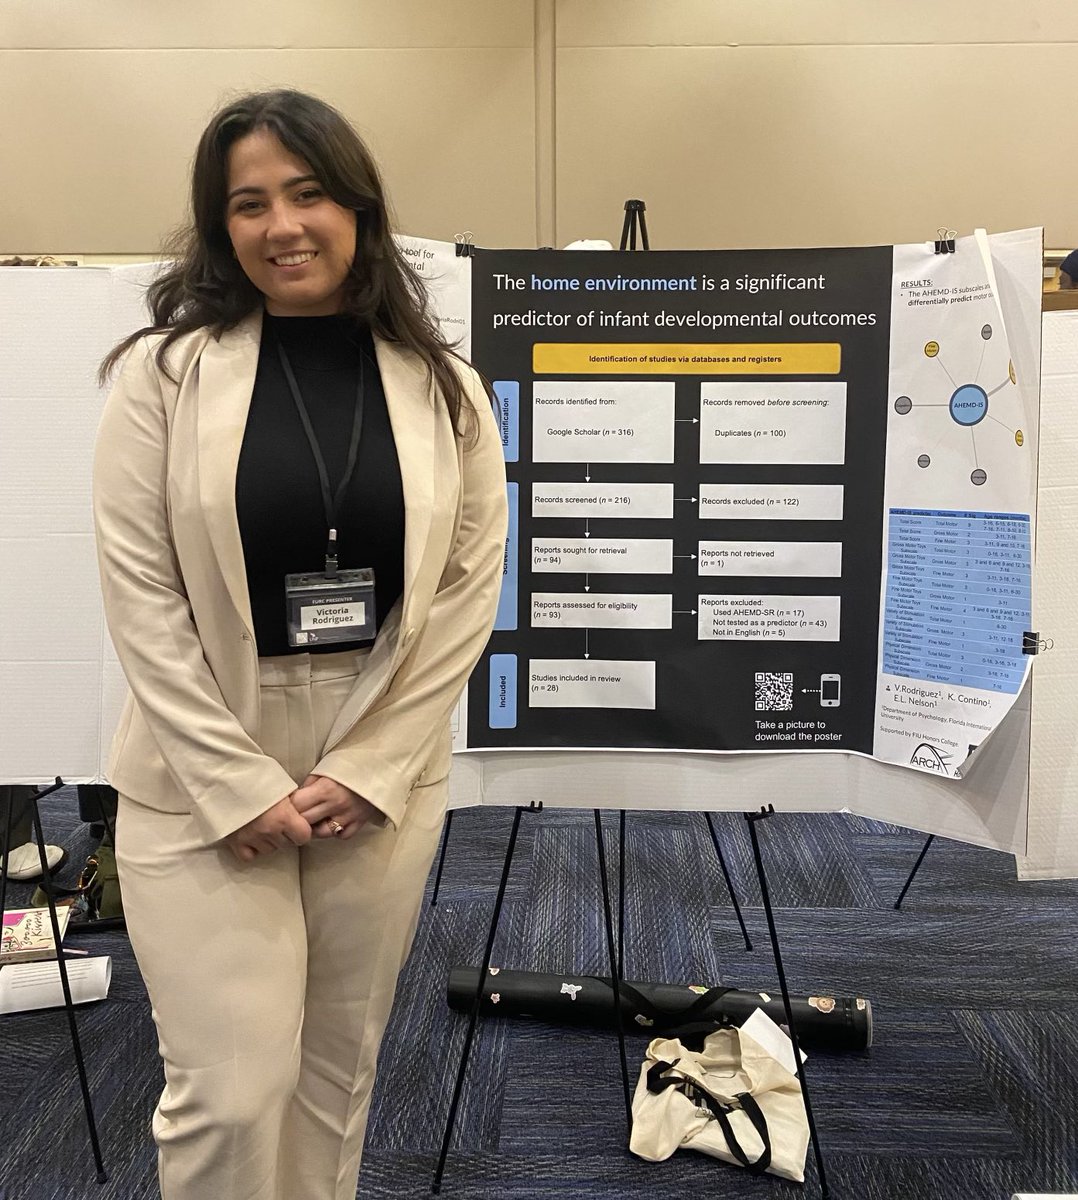 Congrats @victoriarodri01 on a successful poster presentation at the Florida Undergraduate Research Conference @fiupsych @fiuhonors @ElizaLNelson @Kaityn_Contino